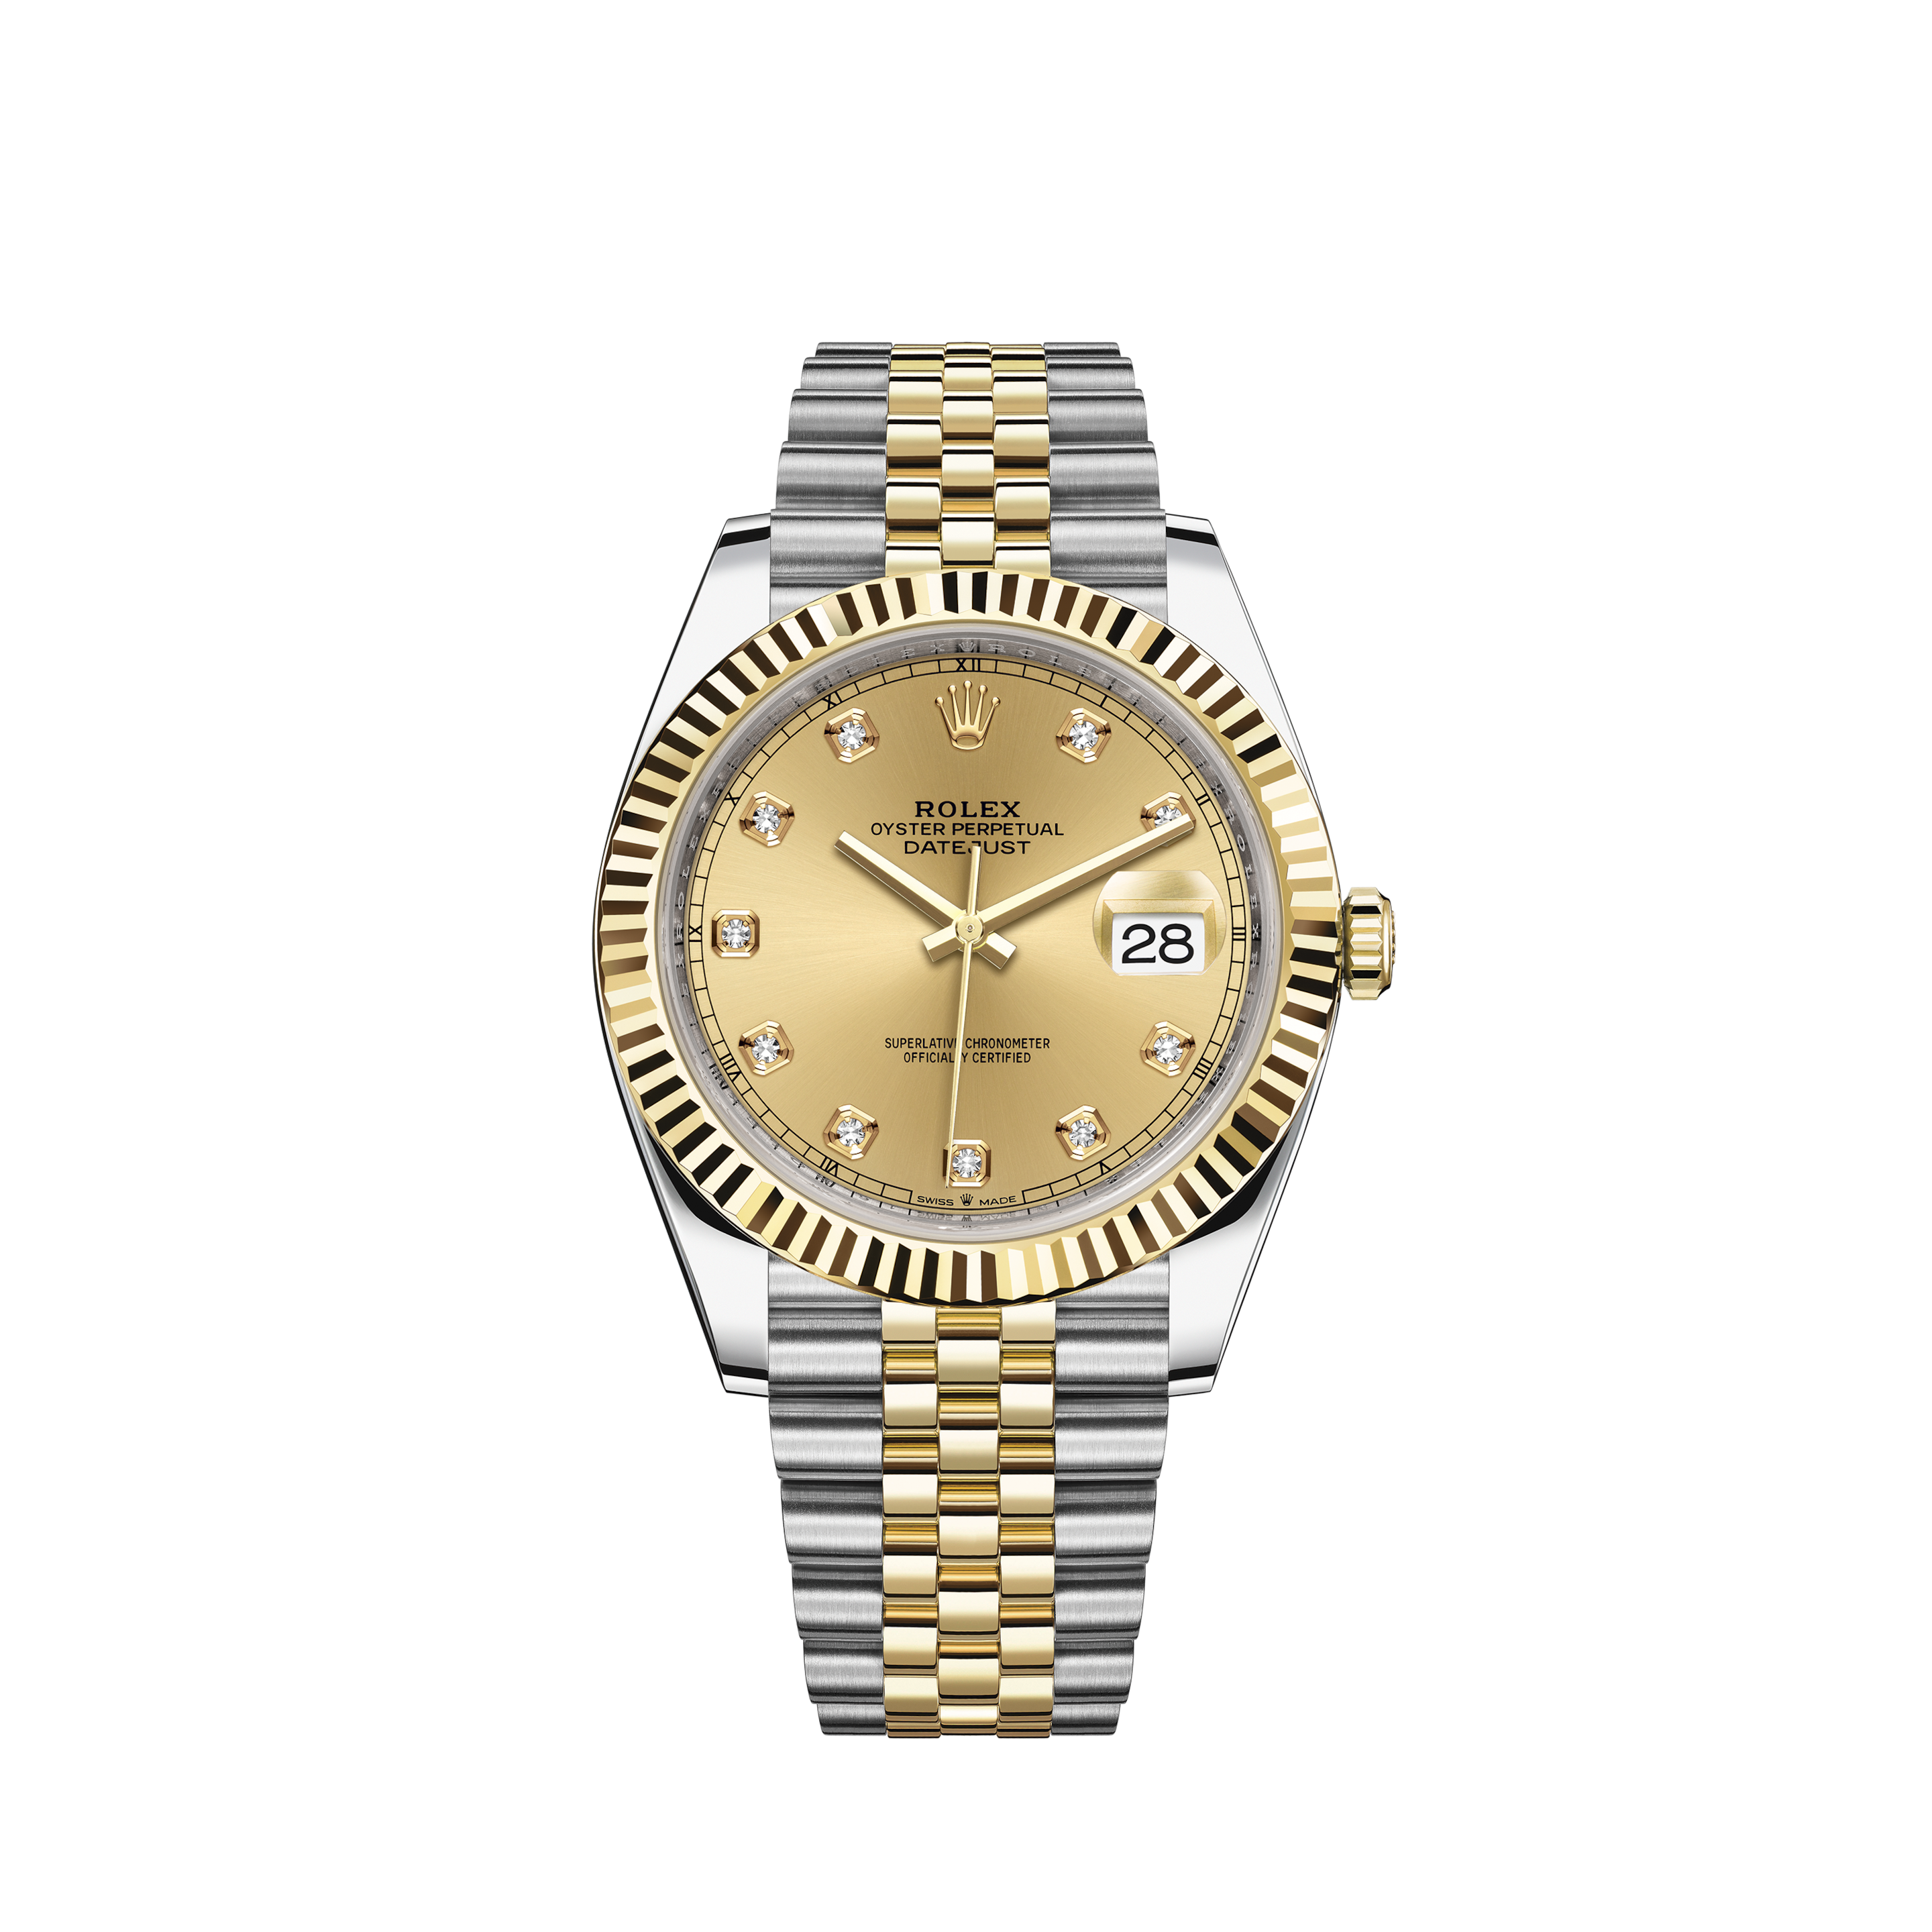 Rolex Datejust Automatic Yellow Gold (14K) Men's Dress Watch 1601Rolex Datejust Automatic twotone 14k/steel 1978 very rare